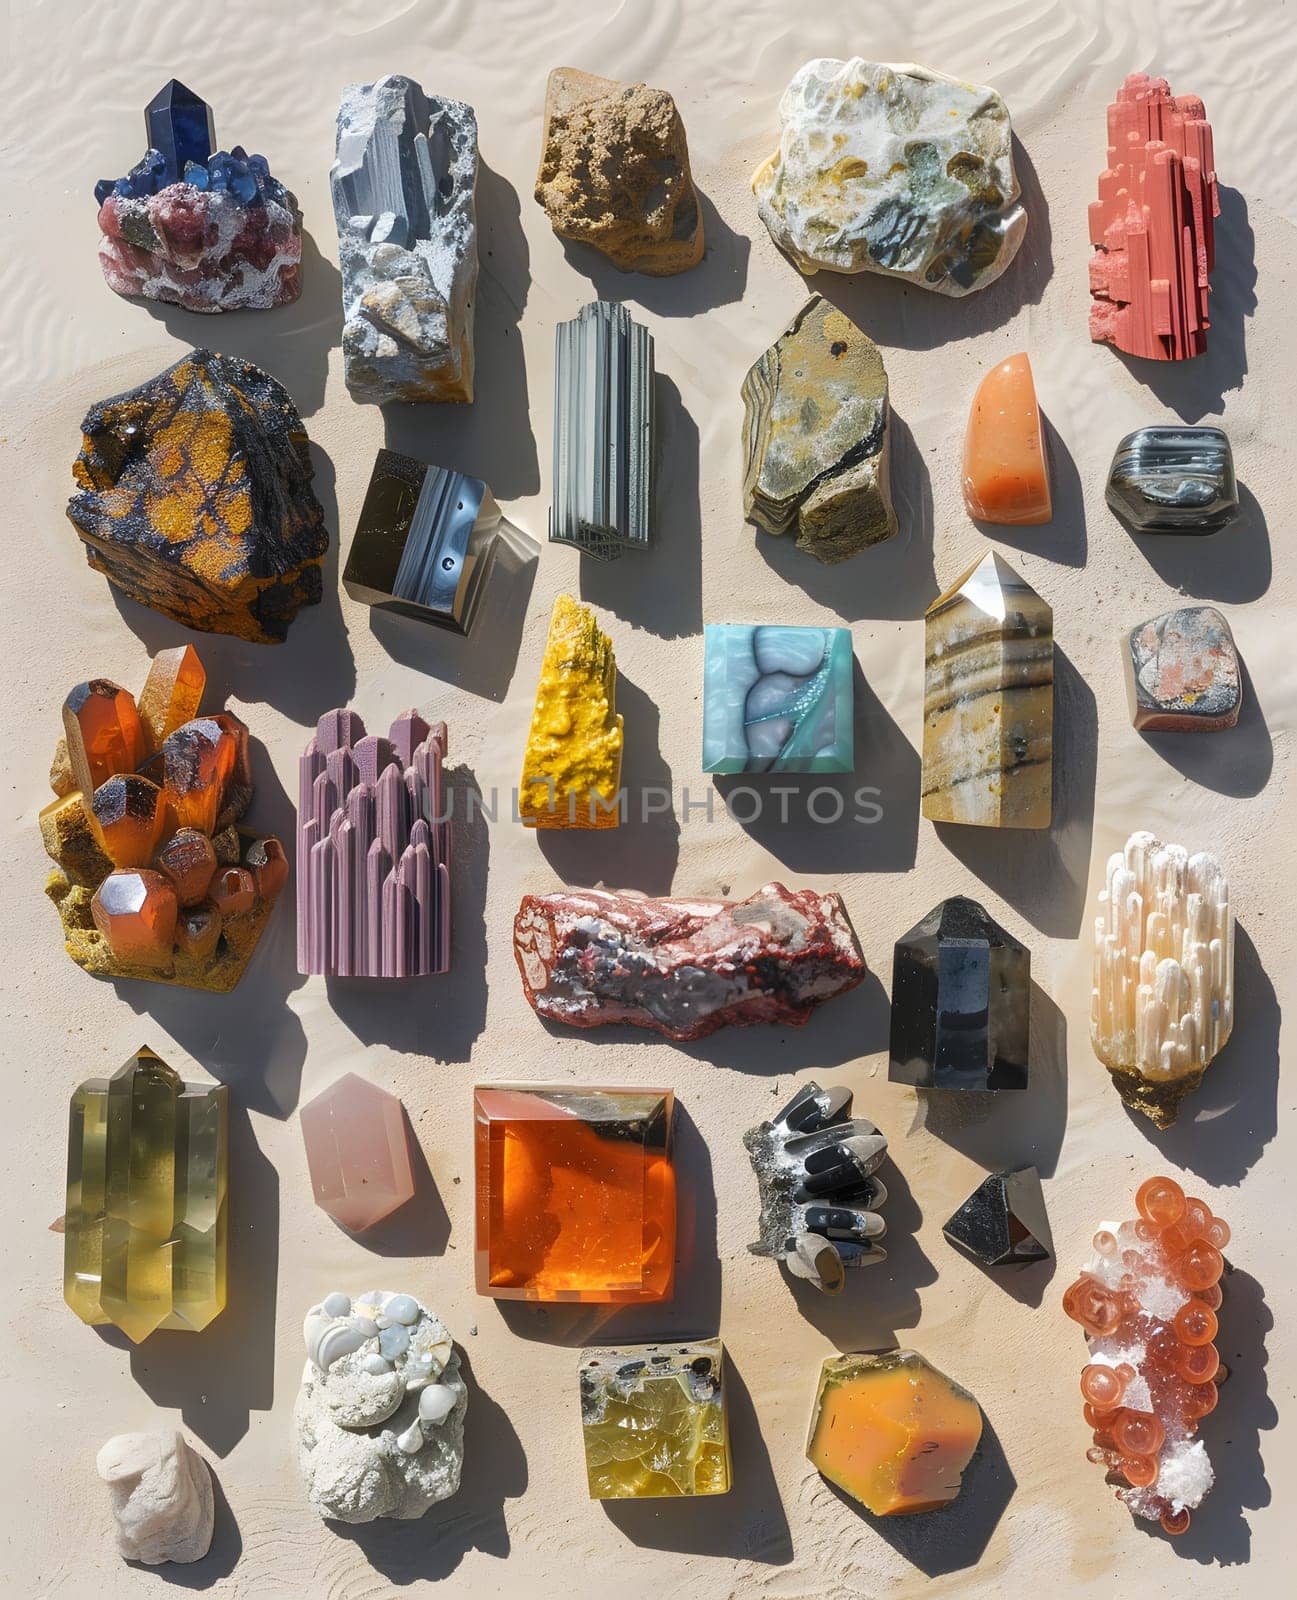 Various rocks and crystals displayed on table for creative arts inspiration by Nadtochiy